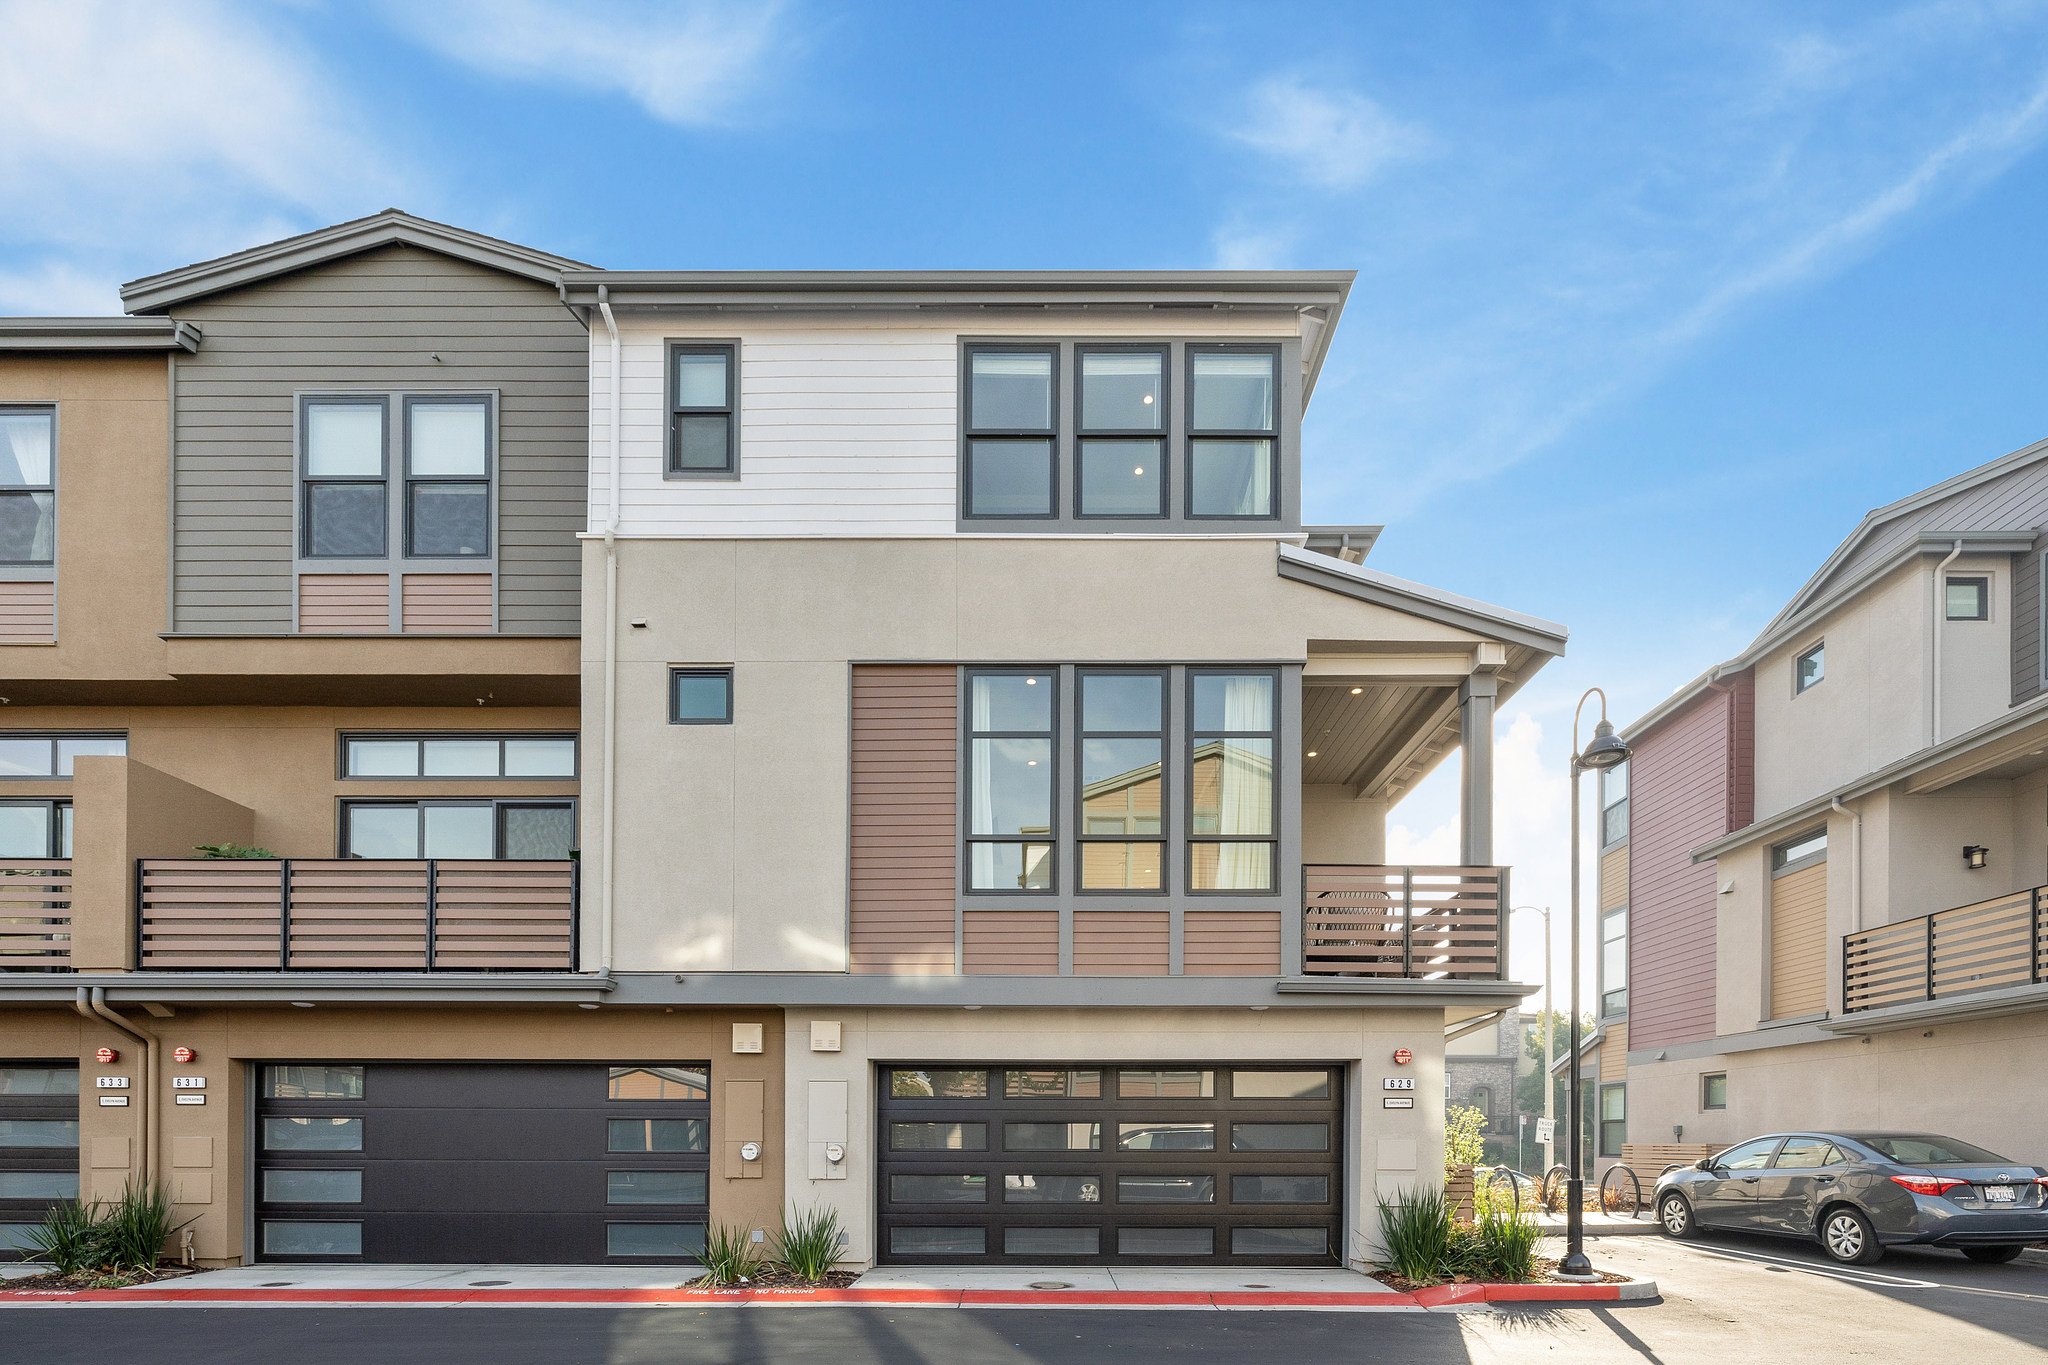 JUST SOLD - Sunnyvale